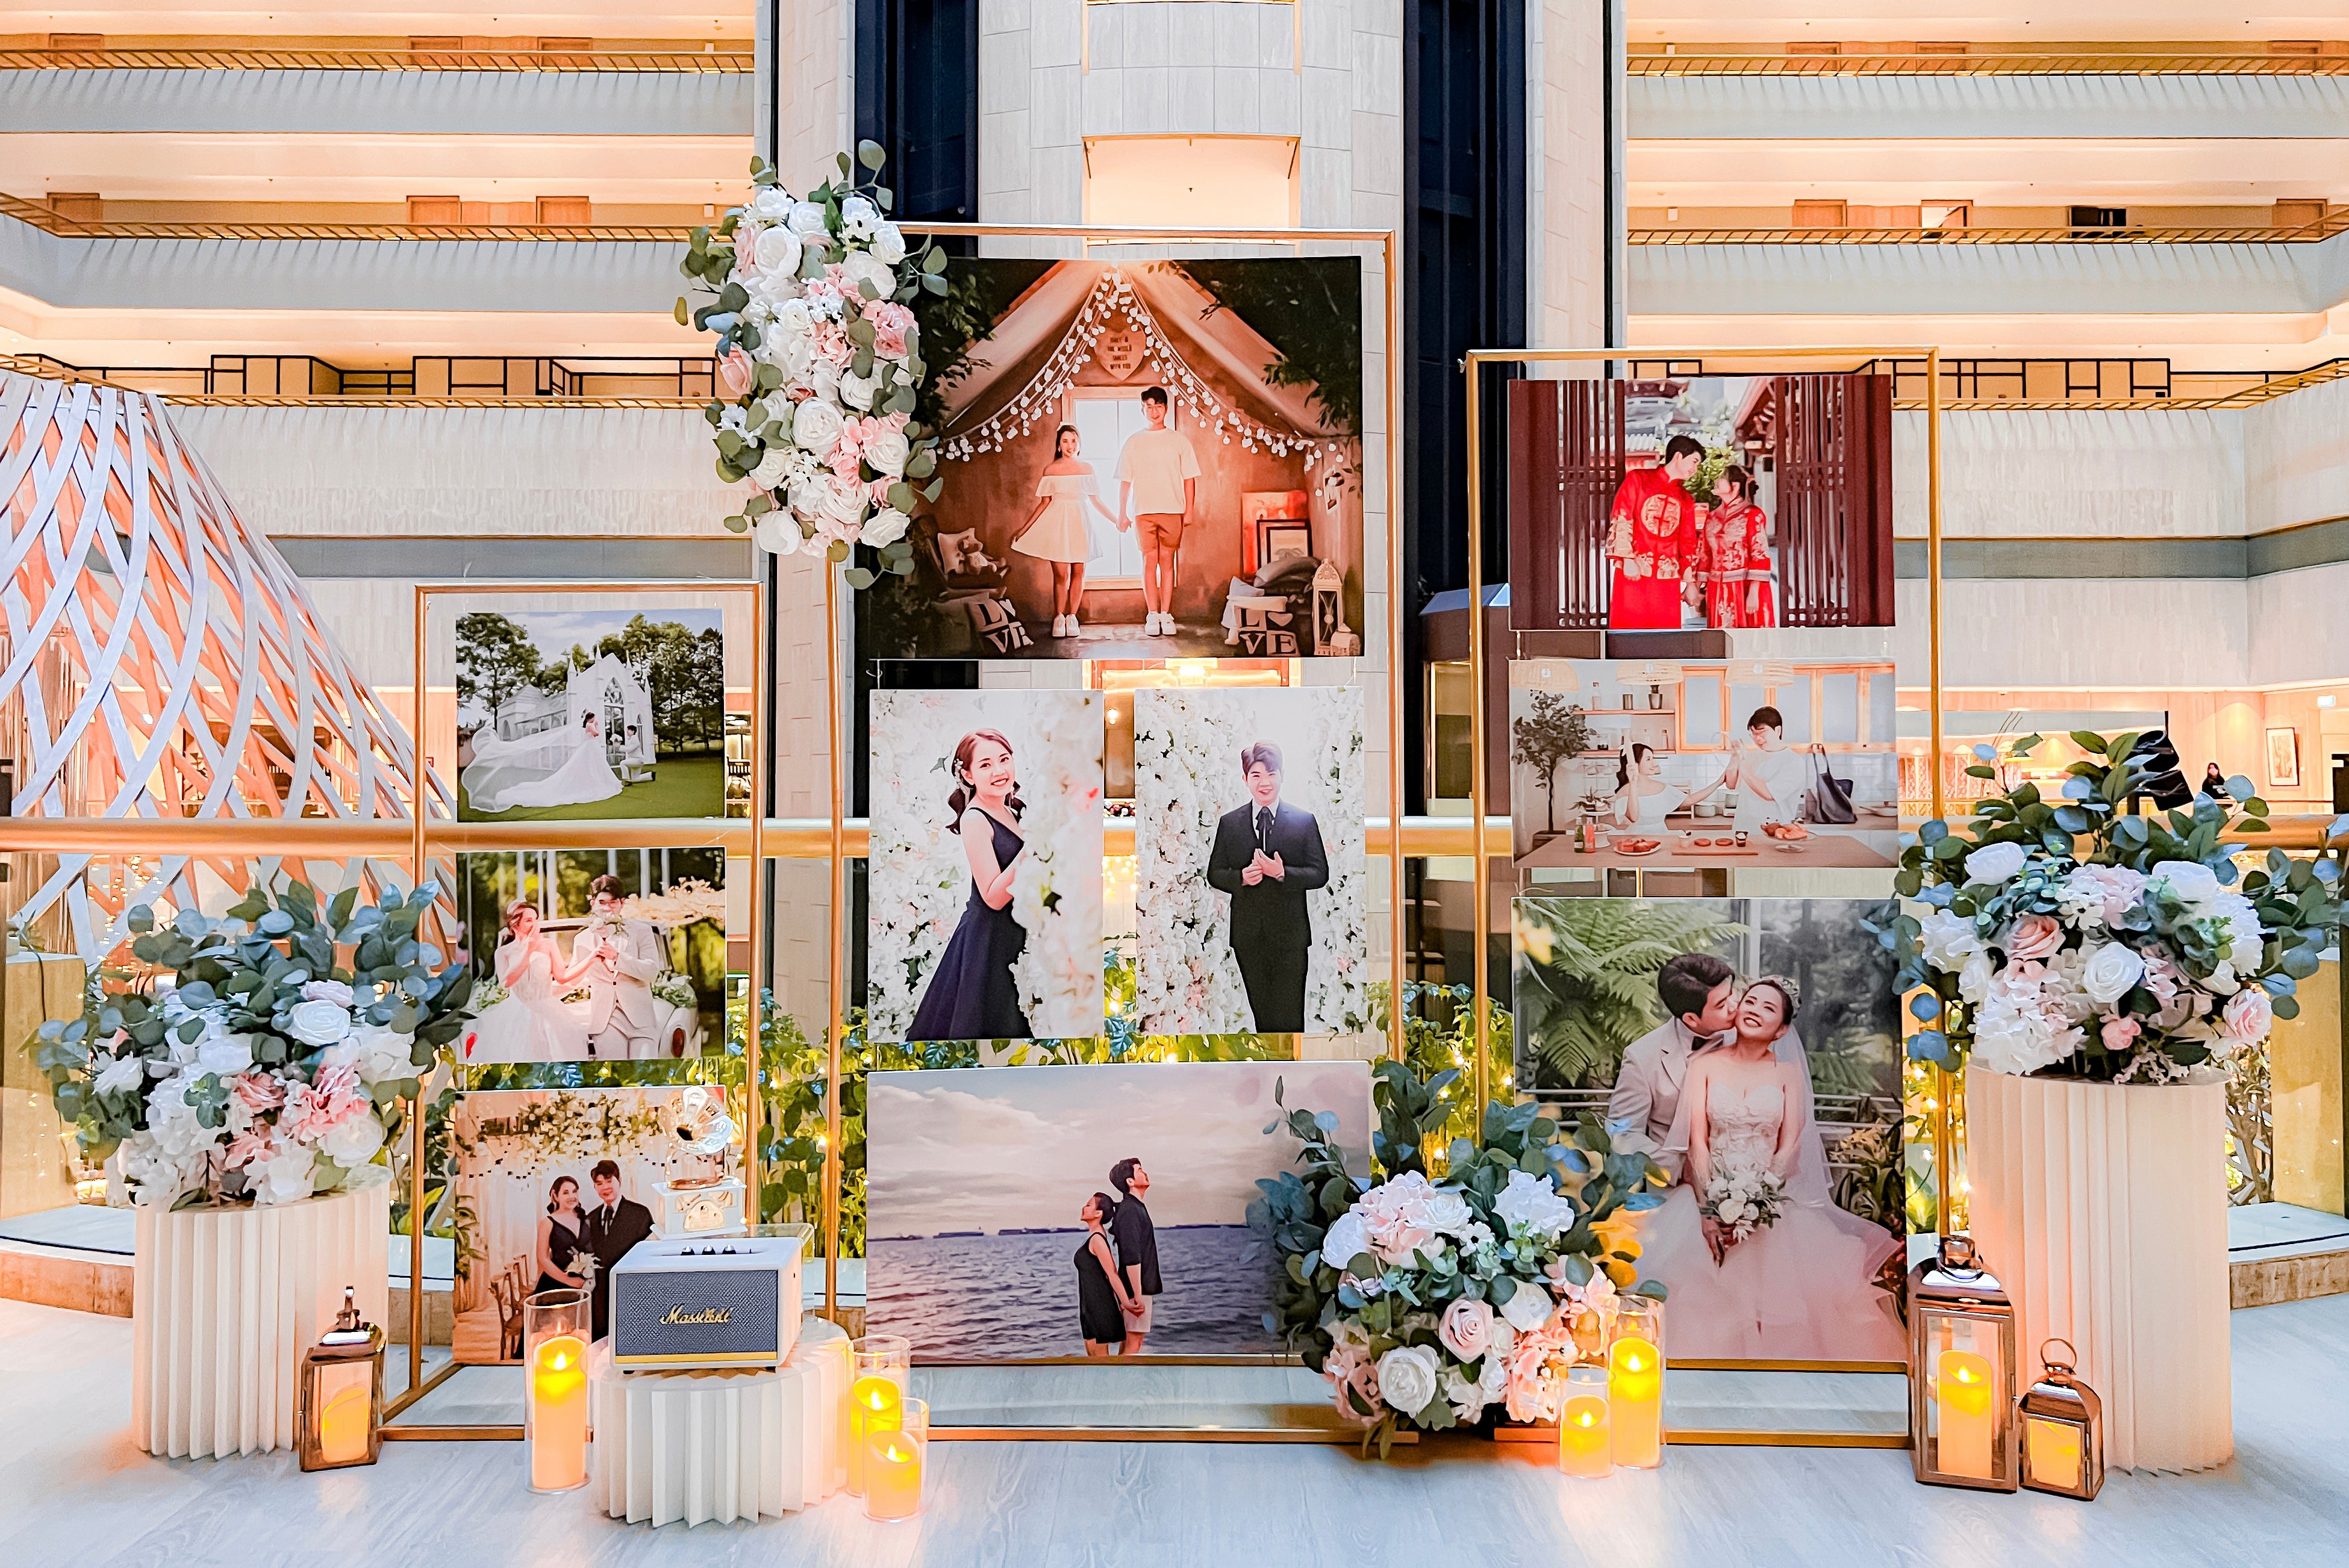 Wedding Reception Decor in Singapore - Multi-stands Photo Gallery with Pink & White Peach Florals (Venue: Parkroyal Collection Marina Bay Atrium Ballroom)